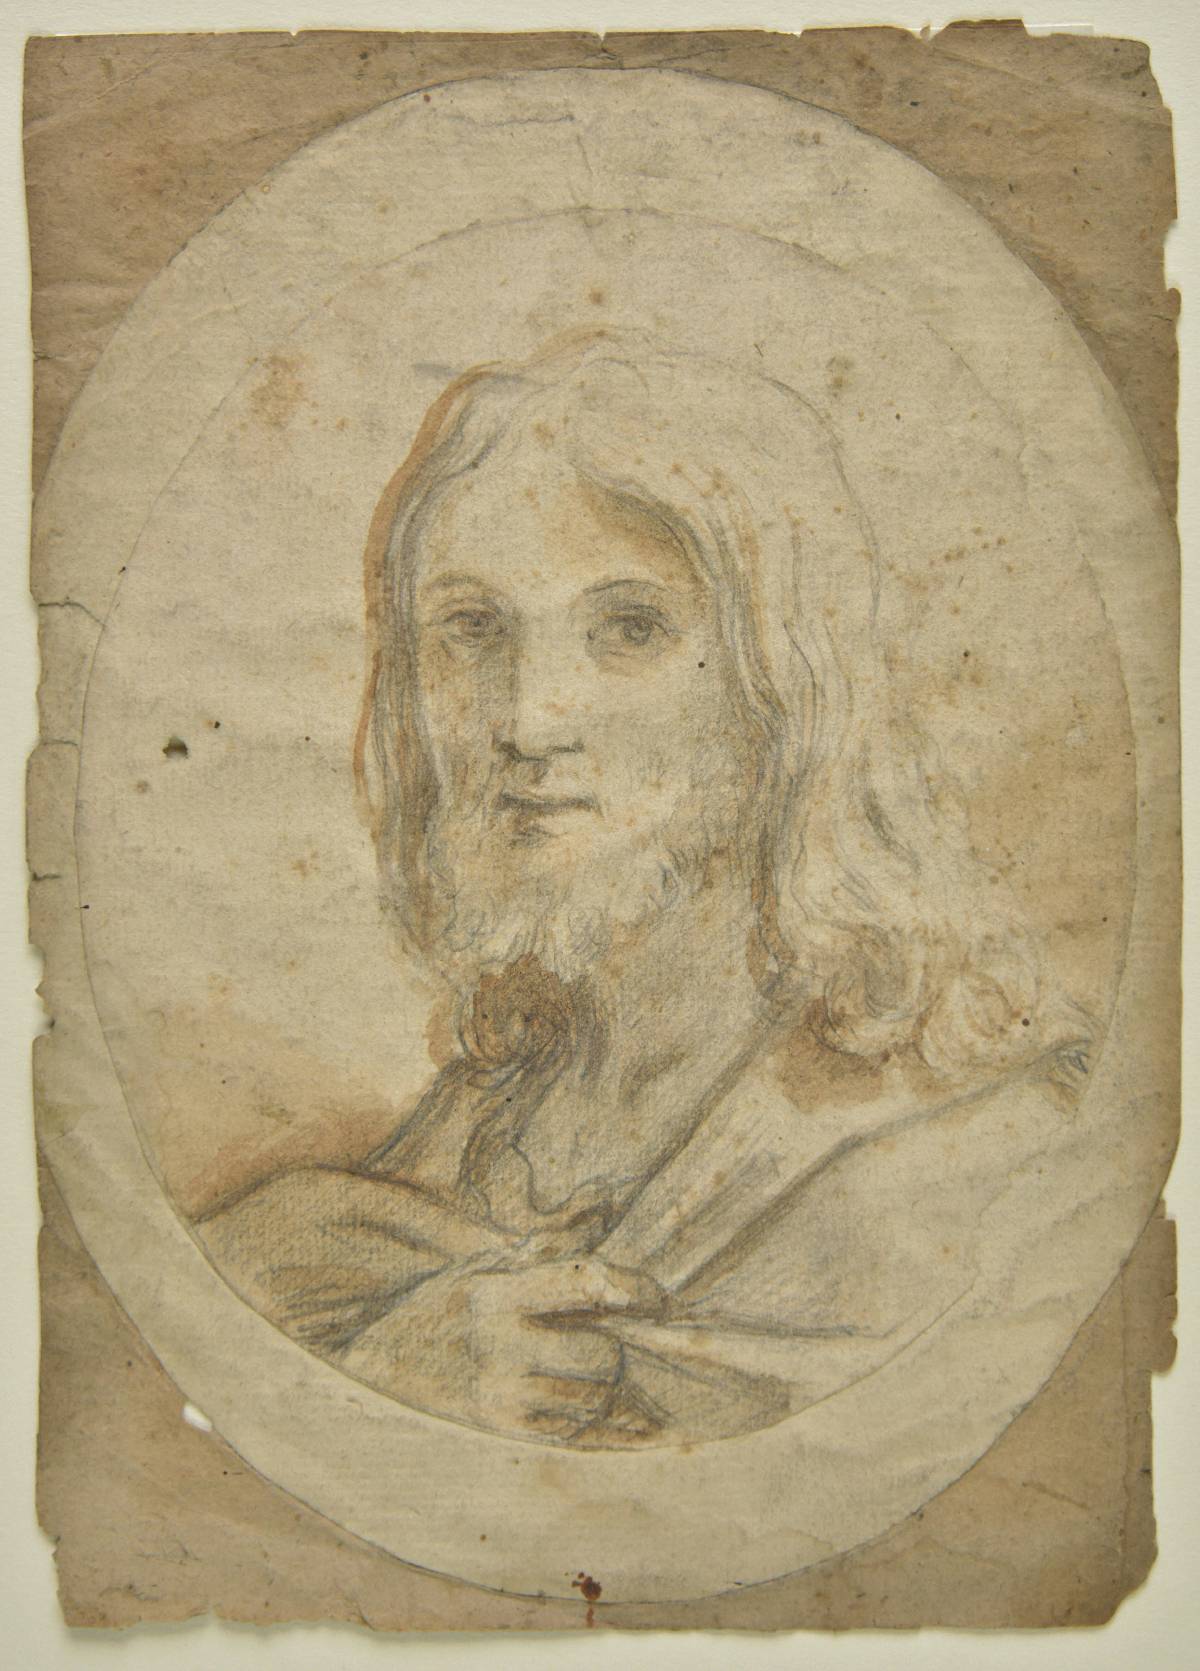 *Attributed to Giovanni Andrea Sirani (1610-1670). Head of Christ, pencil and brown wash on laid